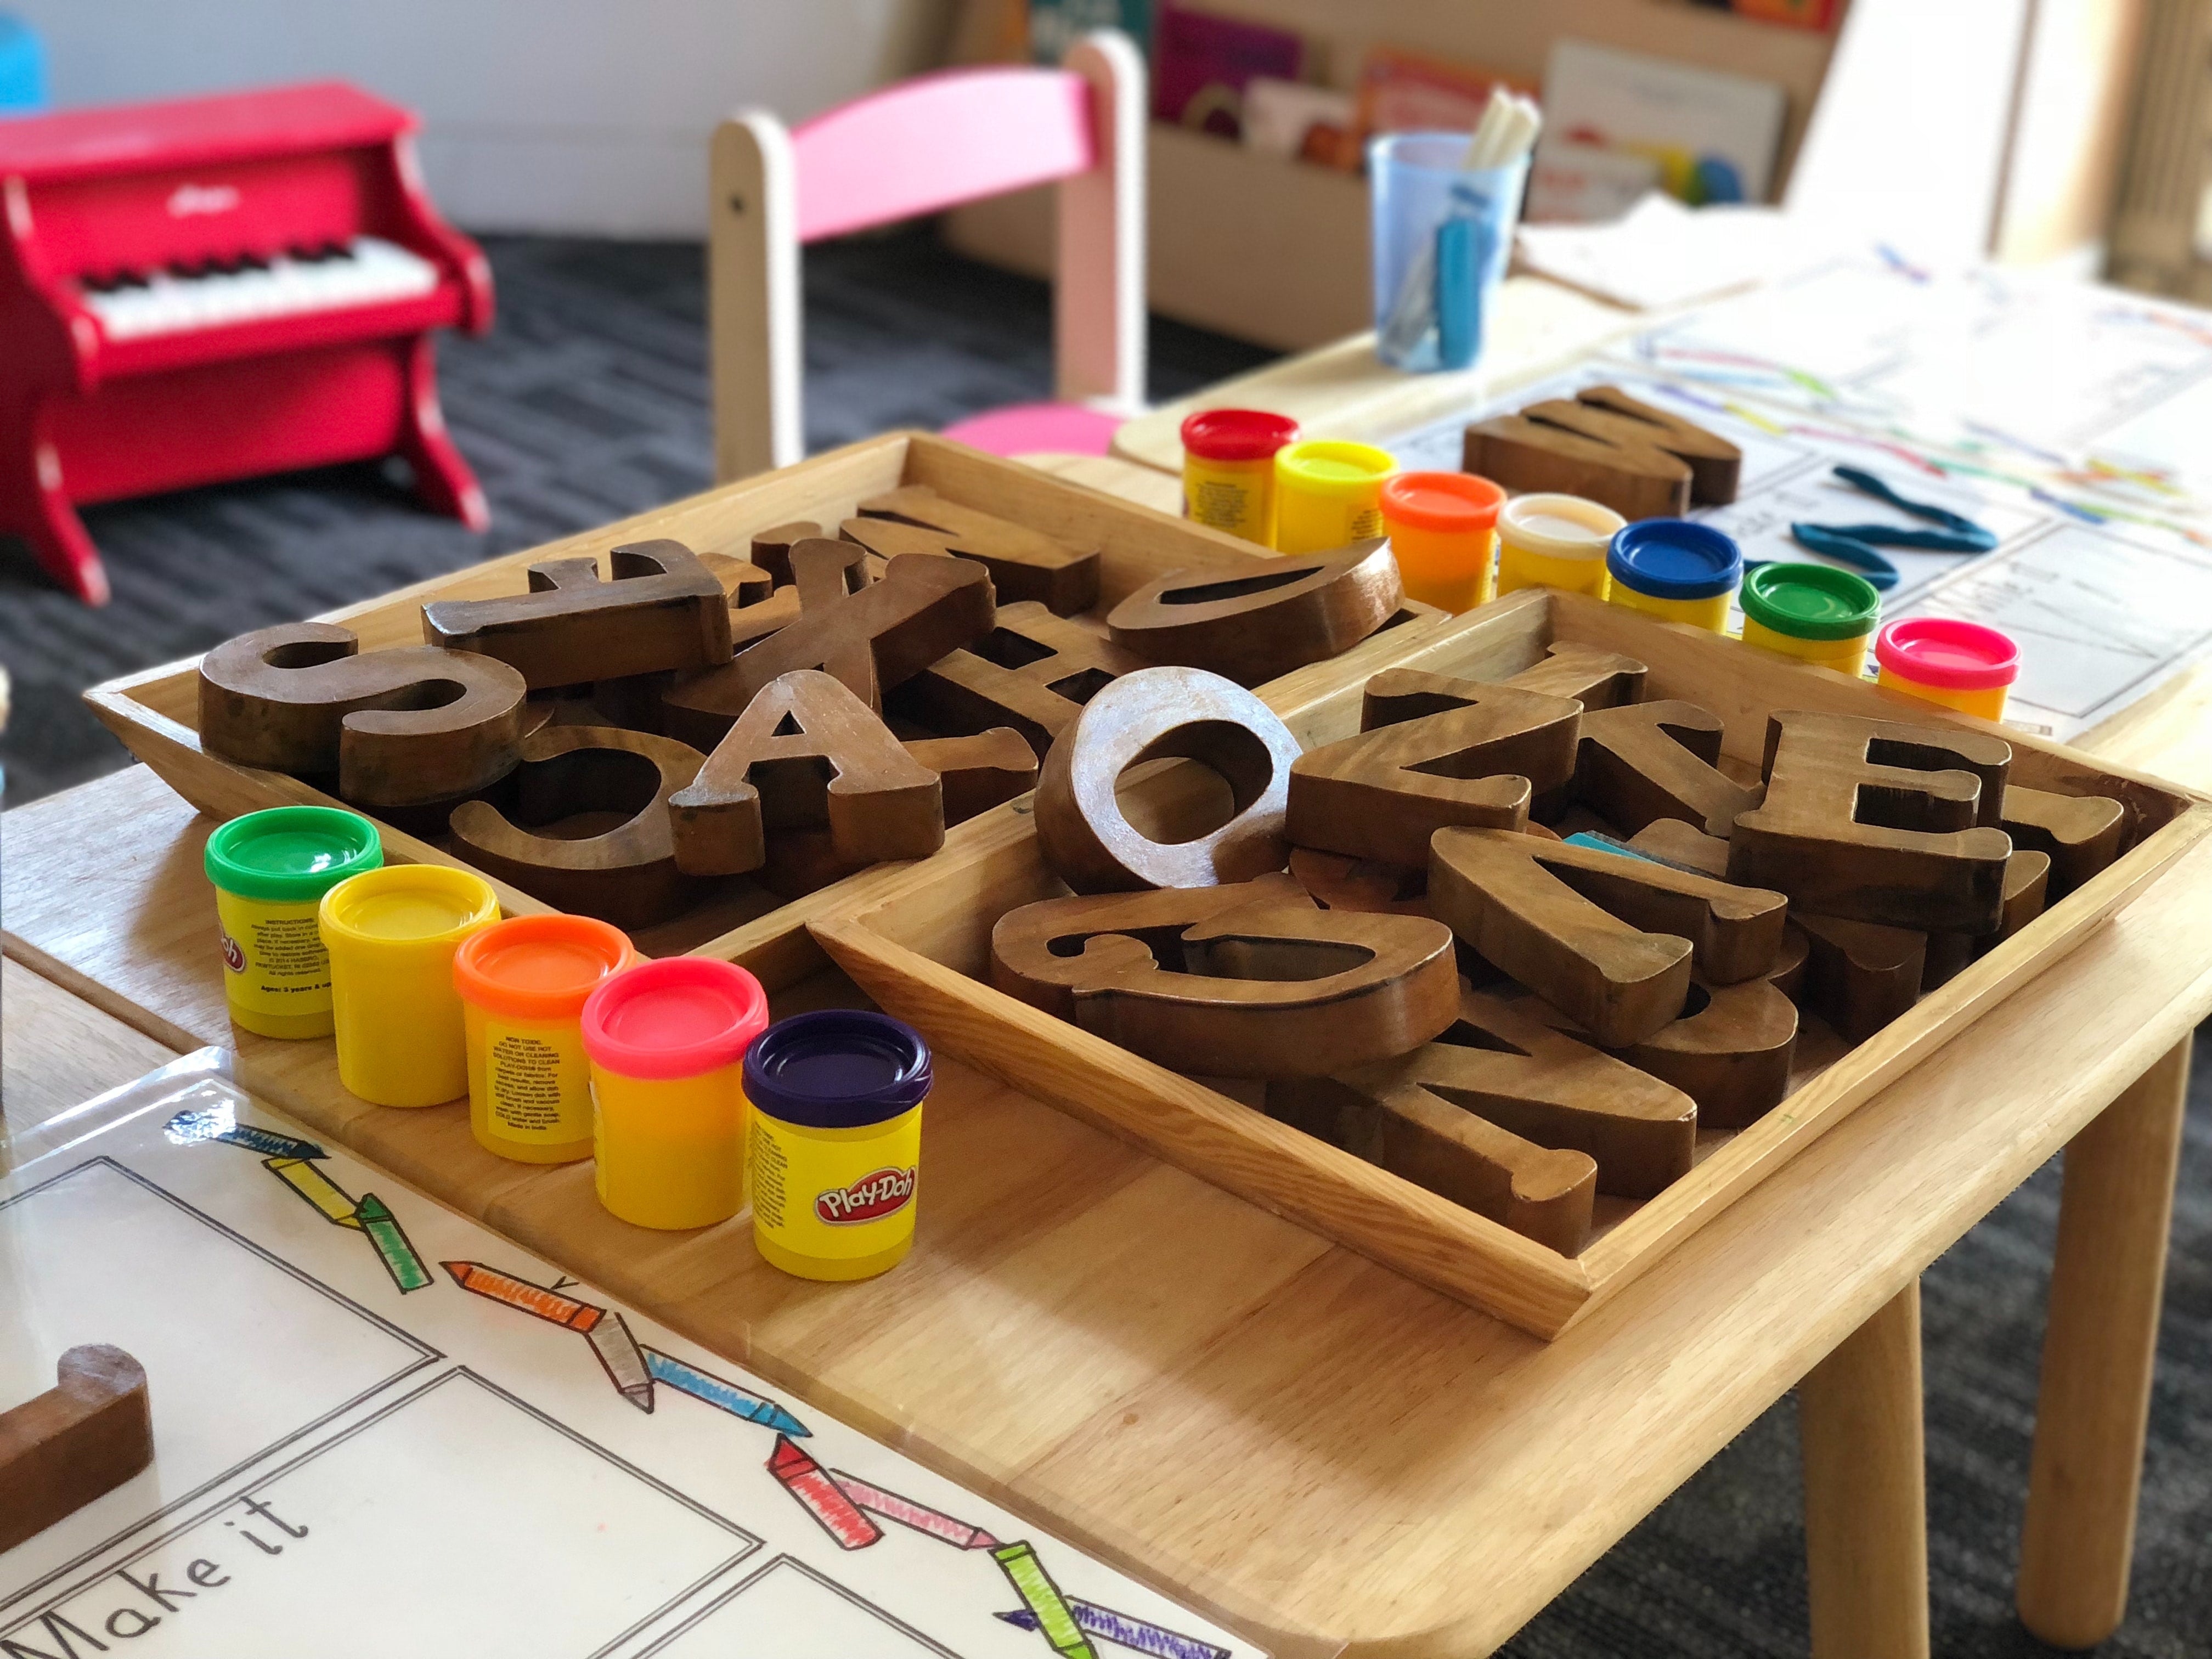 12 Signs of A Good Daycare Center - Simplified Playgrounds